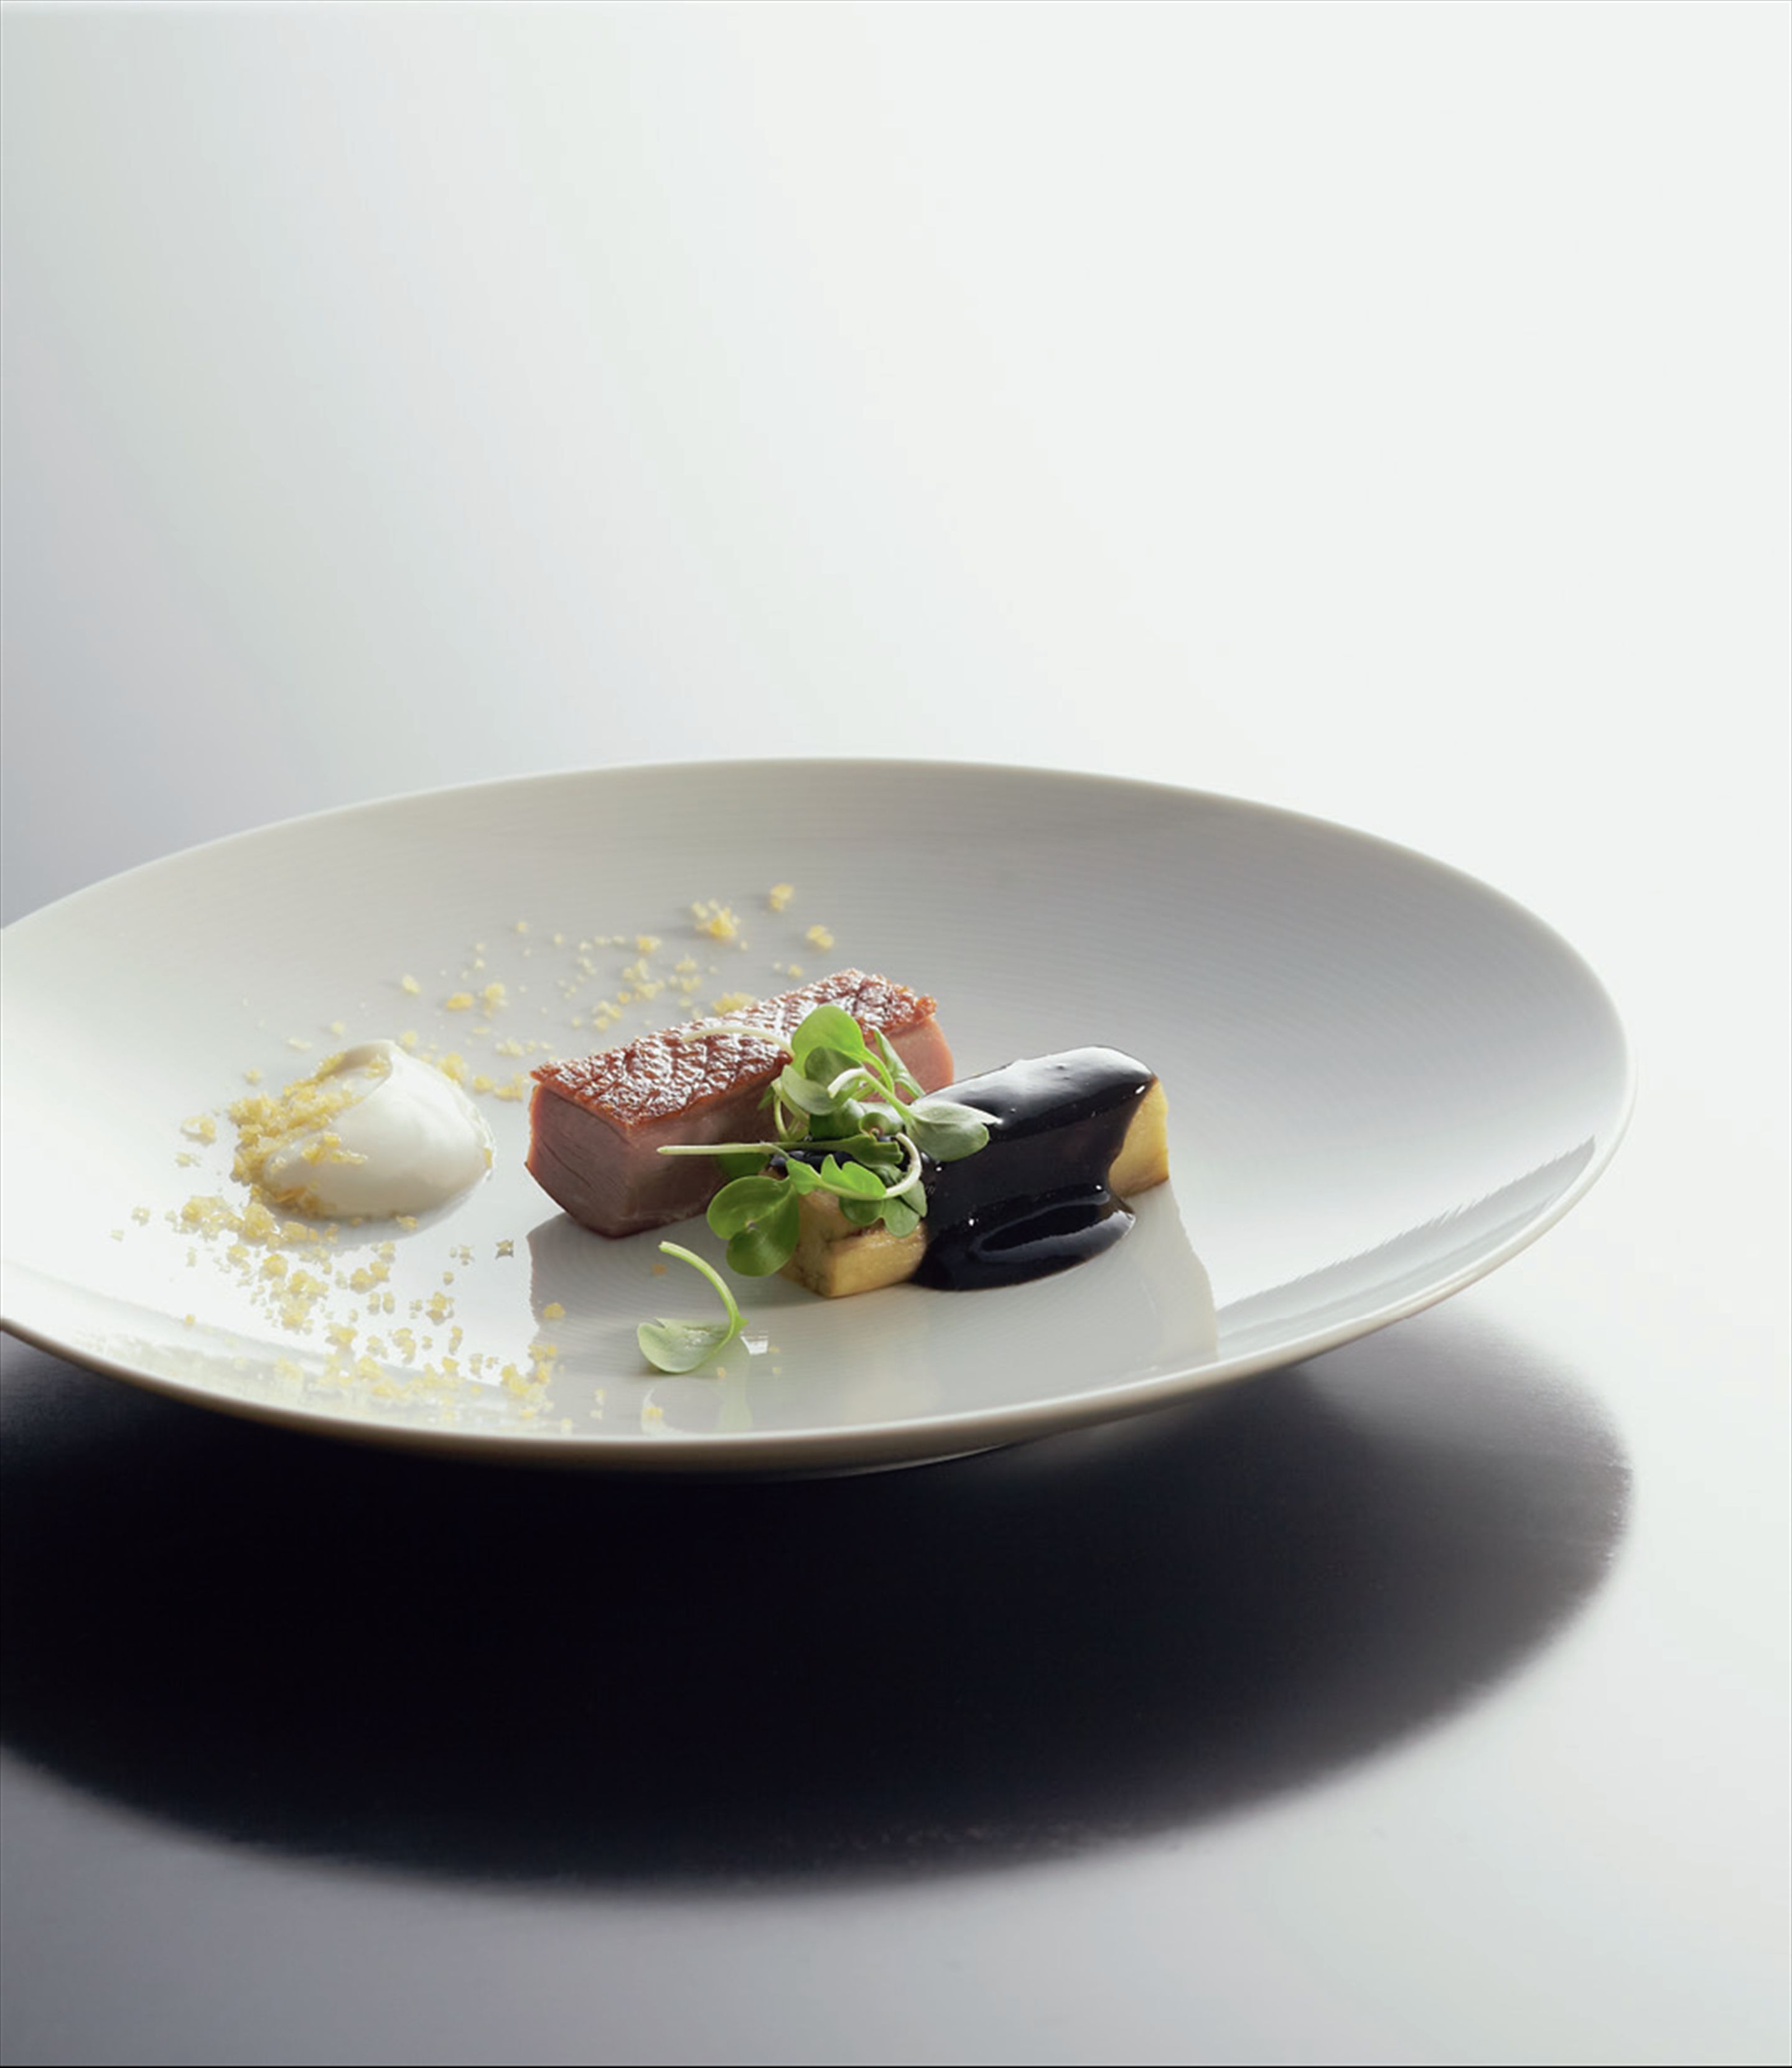 Roast muscovy duck with steamed eggplant, yoghurt and dried scallop